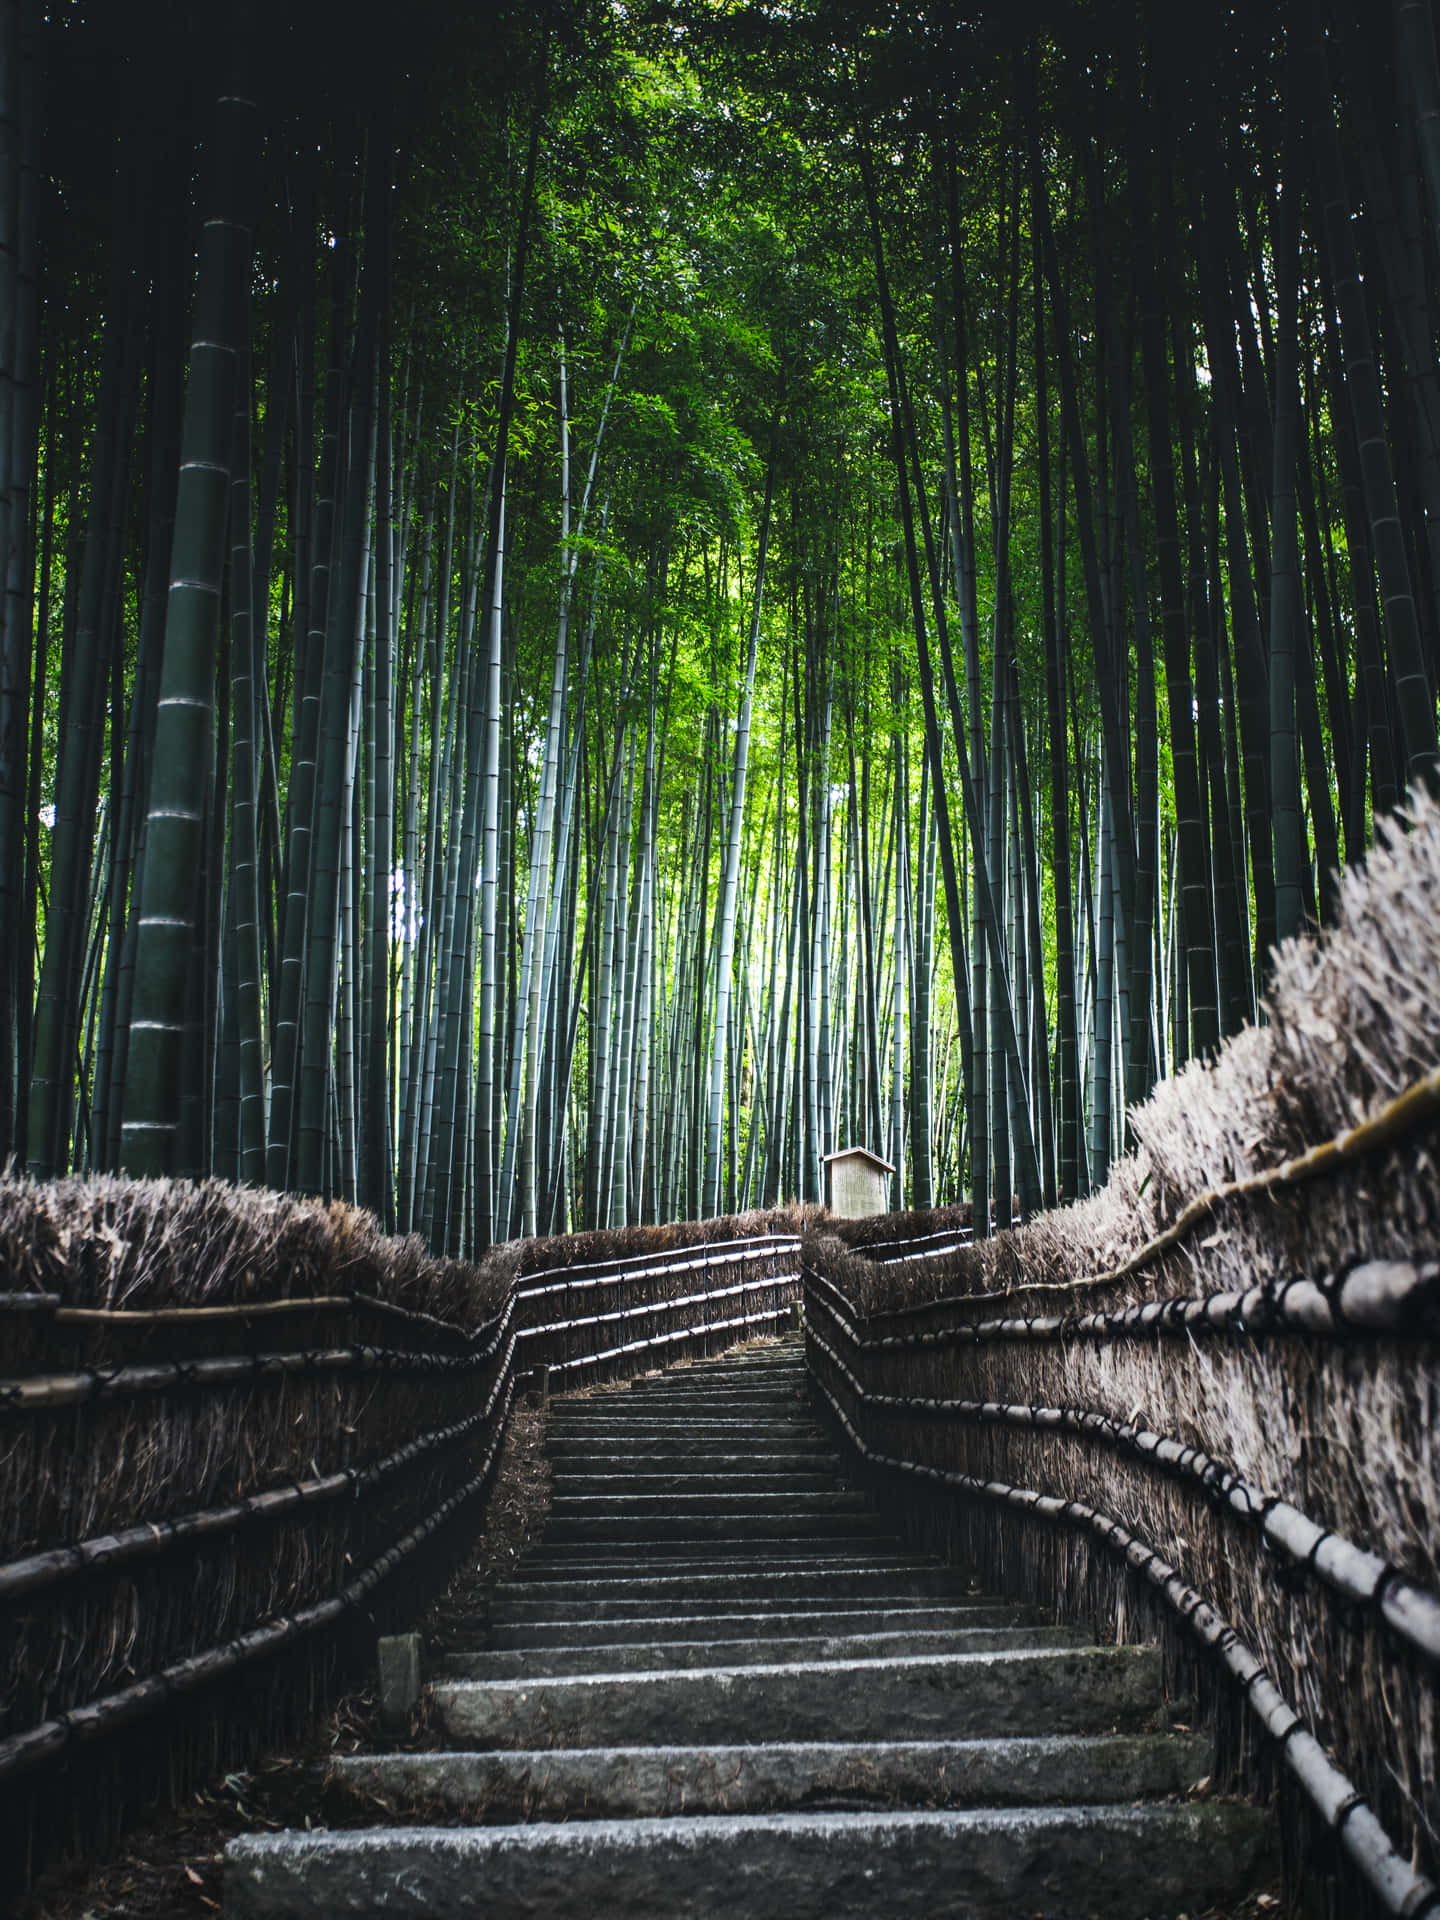 Bamboo Forest Staircase Pathway